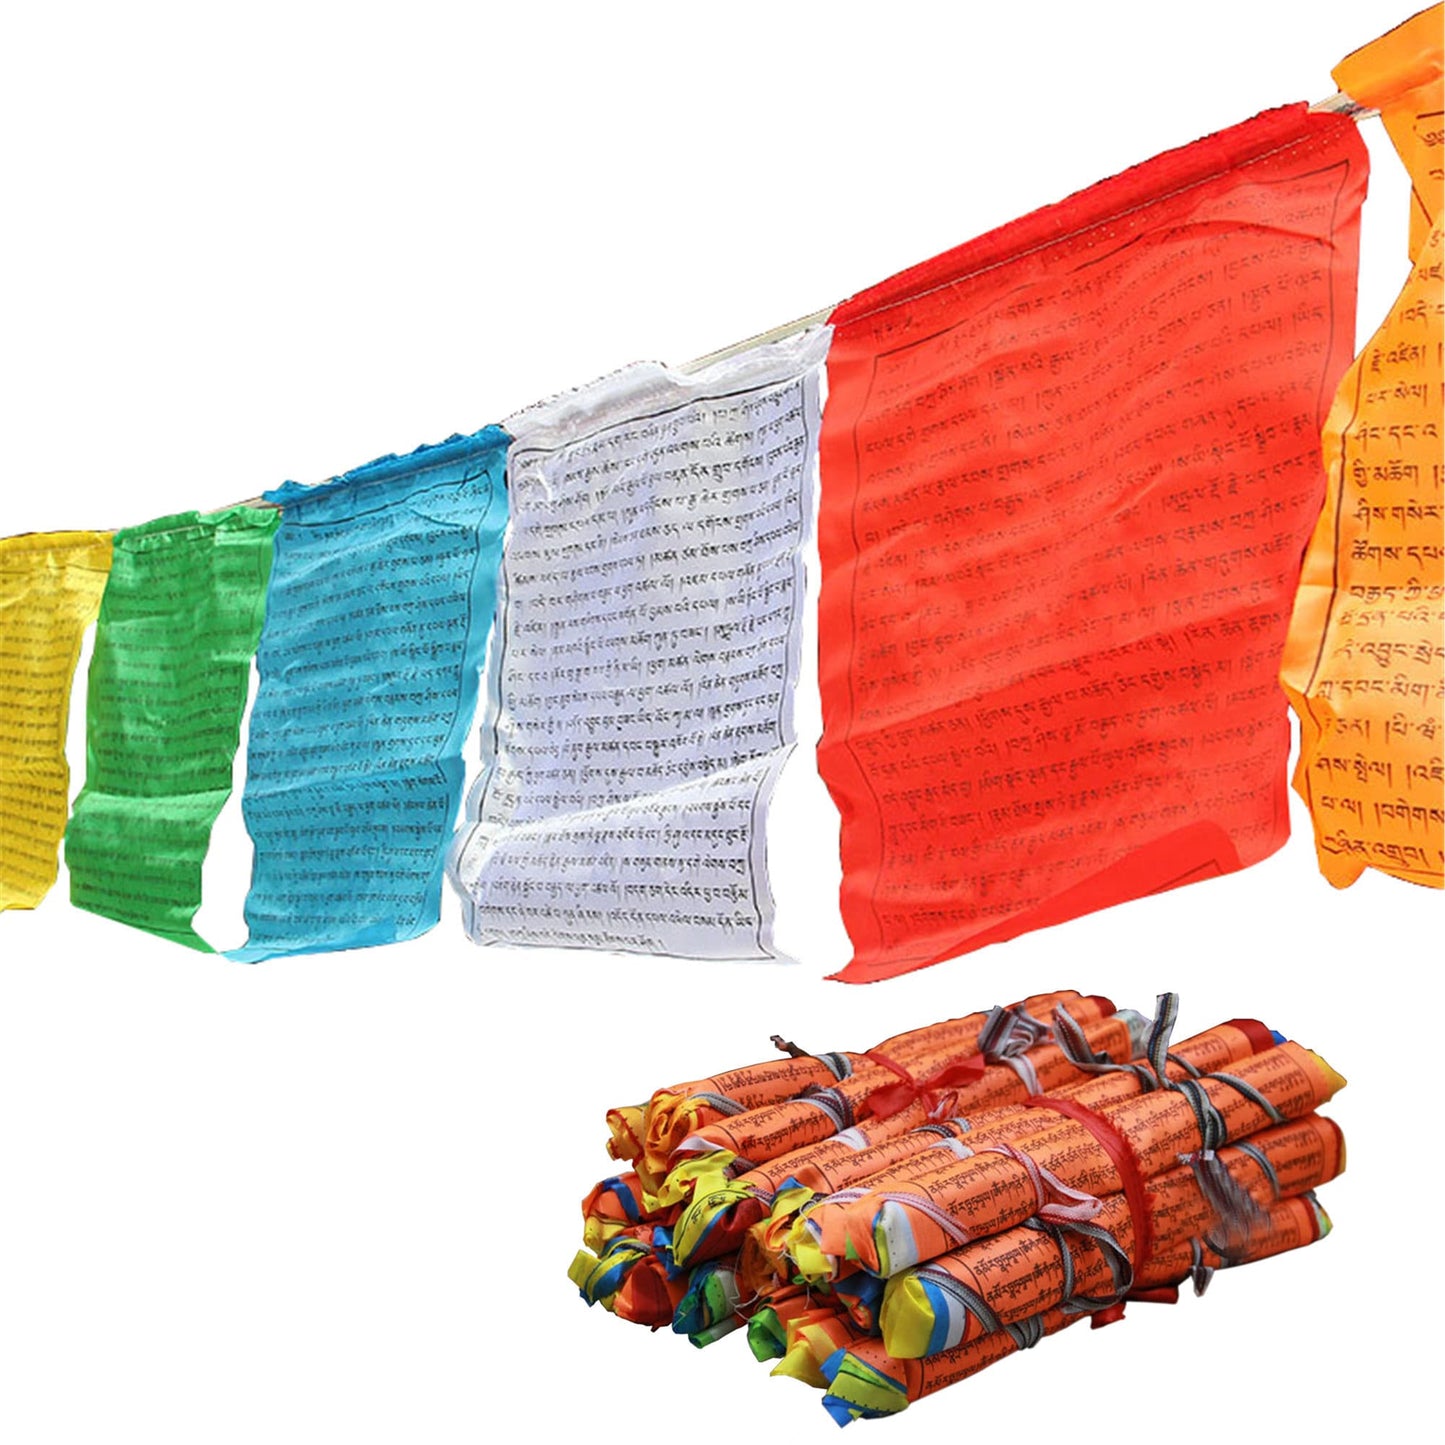 Gandhanra Tibetan Bunting Prayer Flags Akshobhya Buddha Mantra,16.5 Ft * 21 Lungta Flags,Promote Love,Compassion,pPeace,Strength and Wisdom